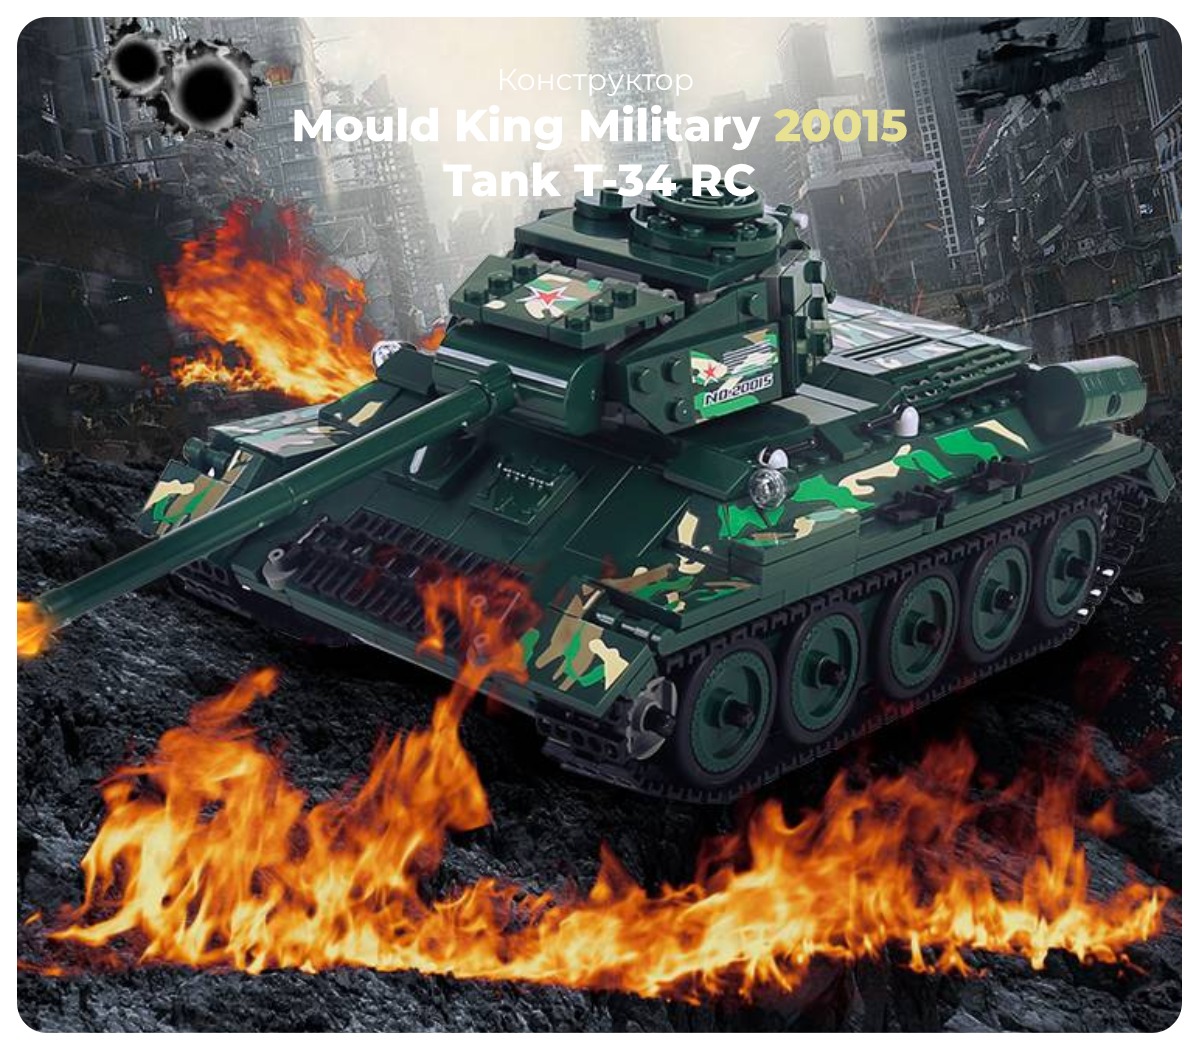 Mould-King-Military-20015-Tank-T-34-RC-01